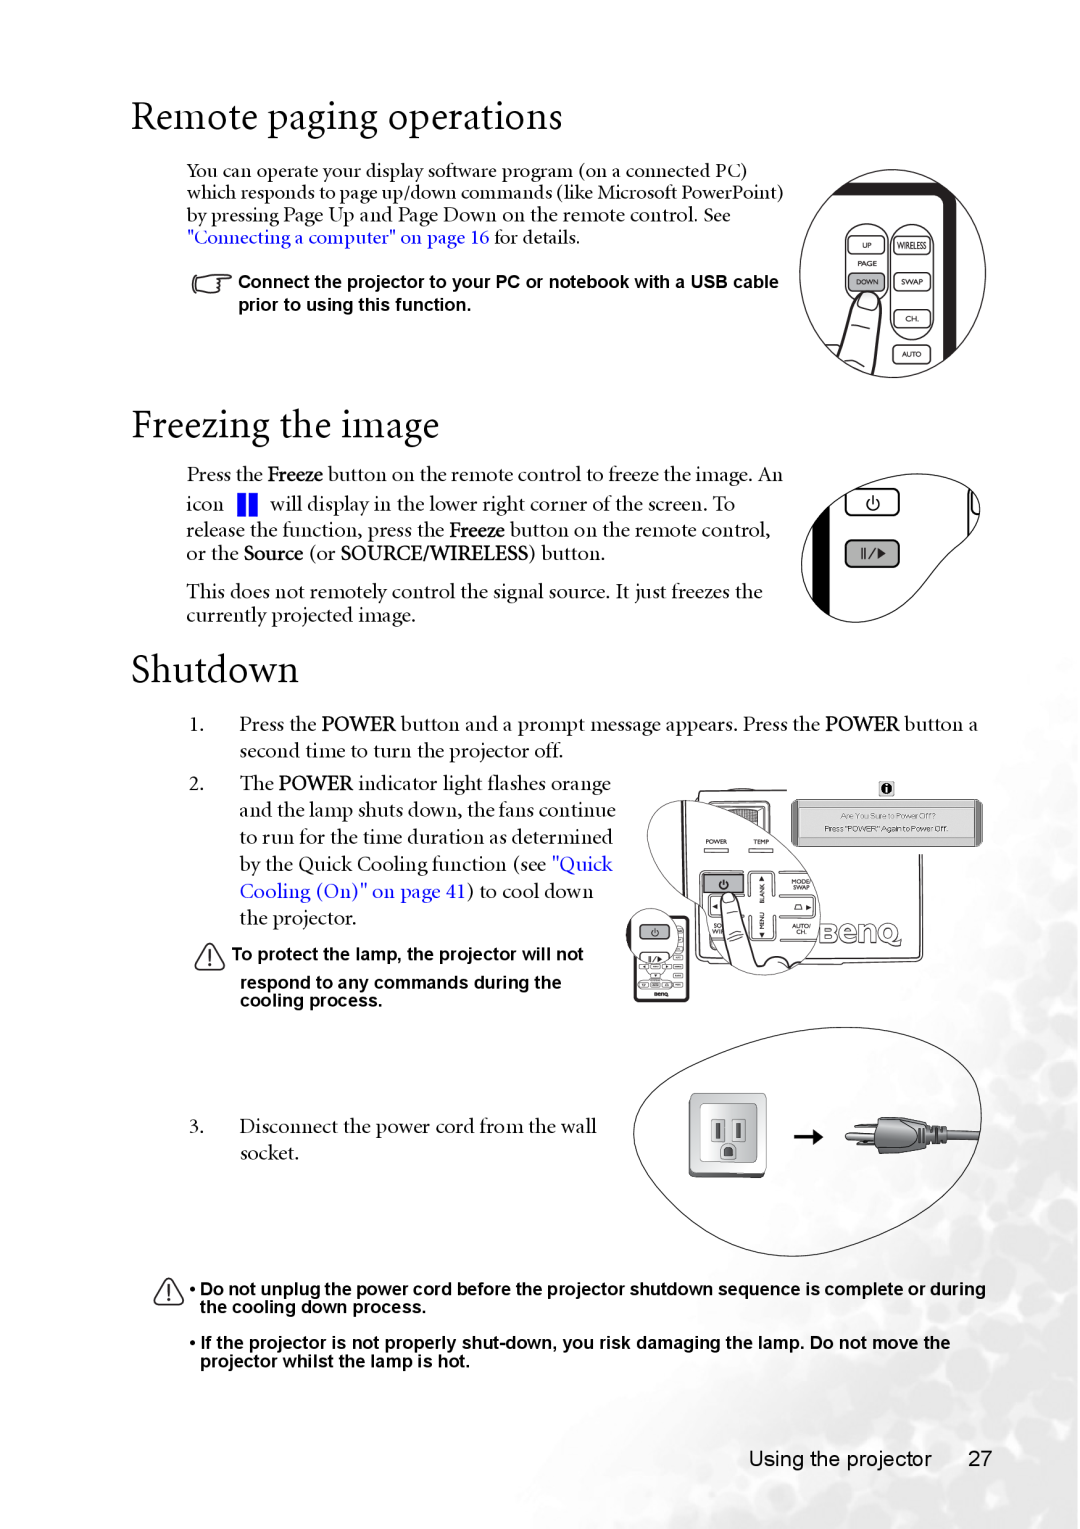 BenQ CP120 manual Remote paging operations, Freezing the image, Shutdown 